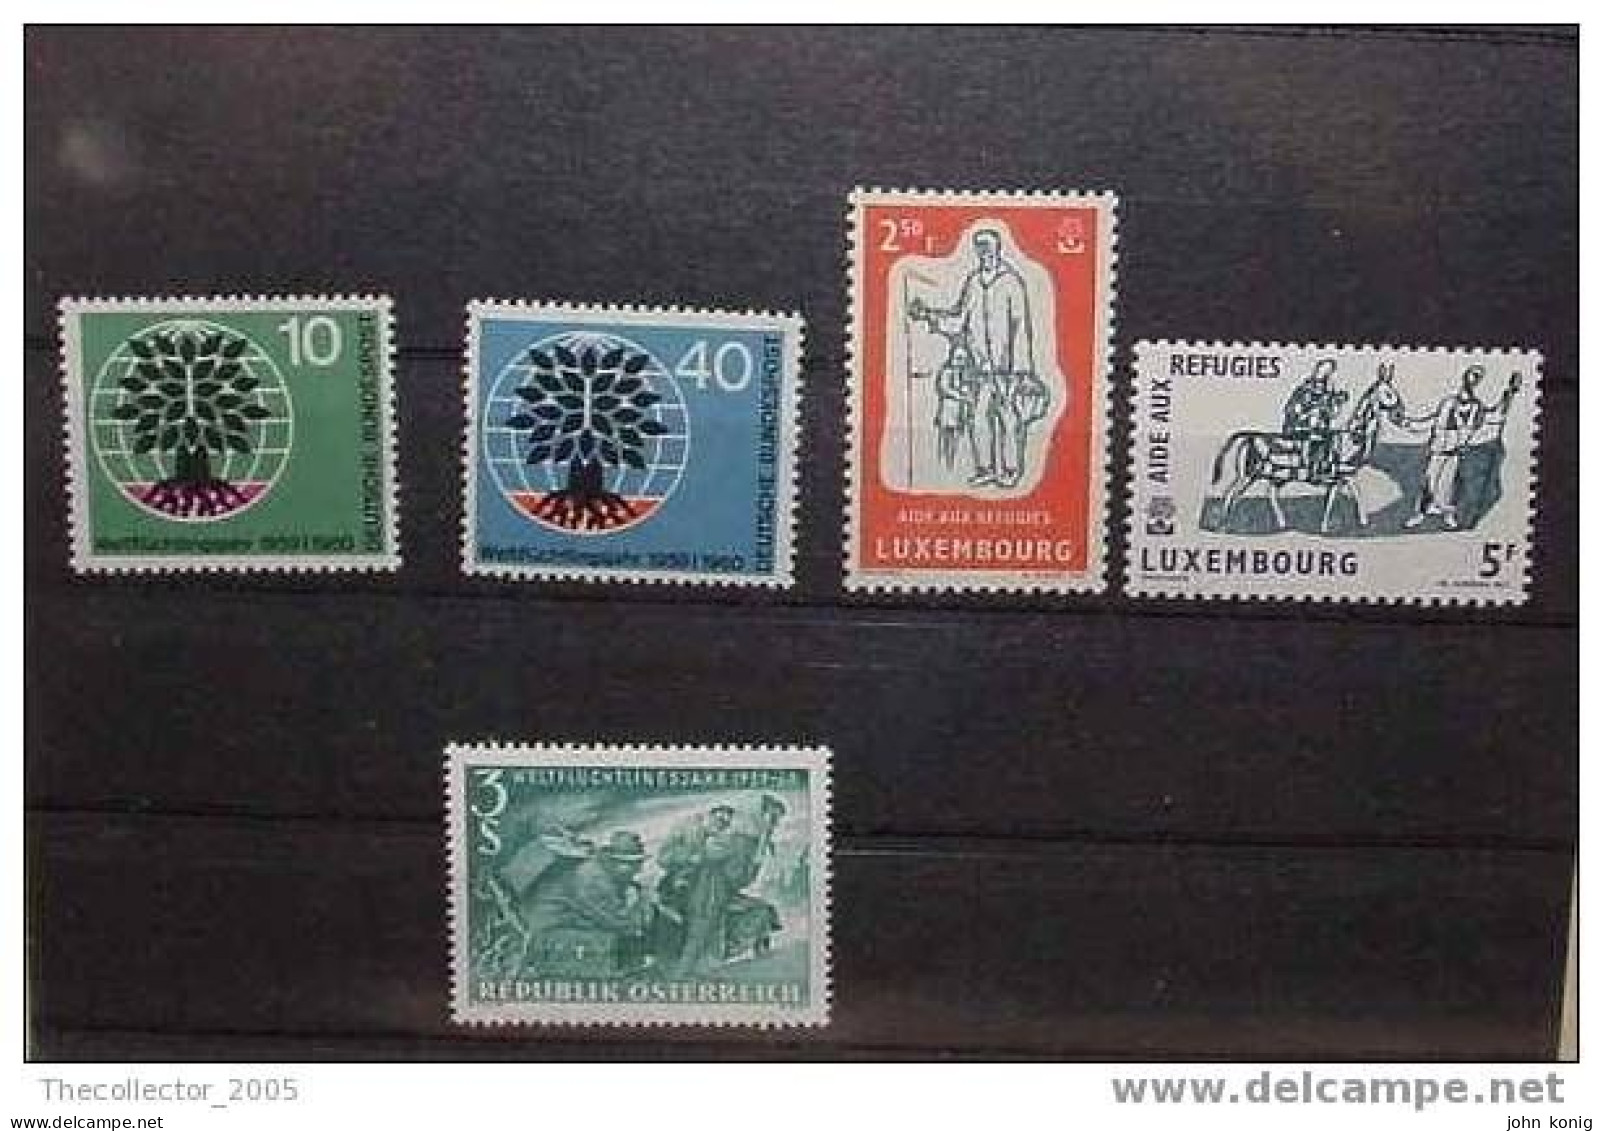 ANNO DEL RIFUGIATO-REFUGEE YEAR- SET OF 5 - GERMANY-LUXEMBOURG-AUSTRIA - Réfugiés